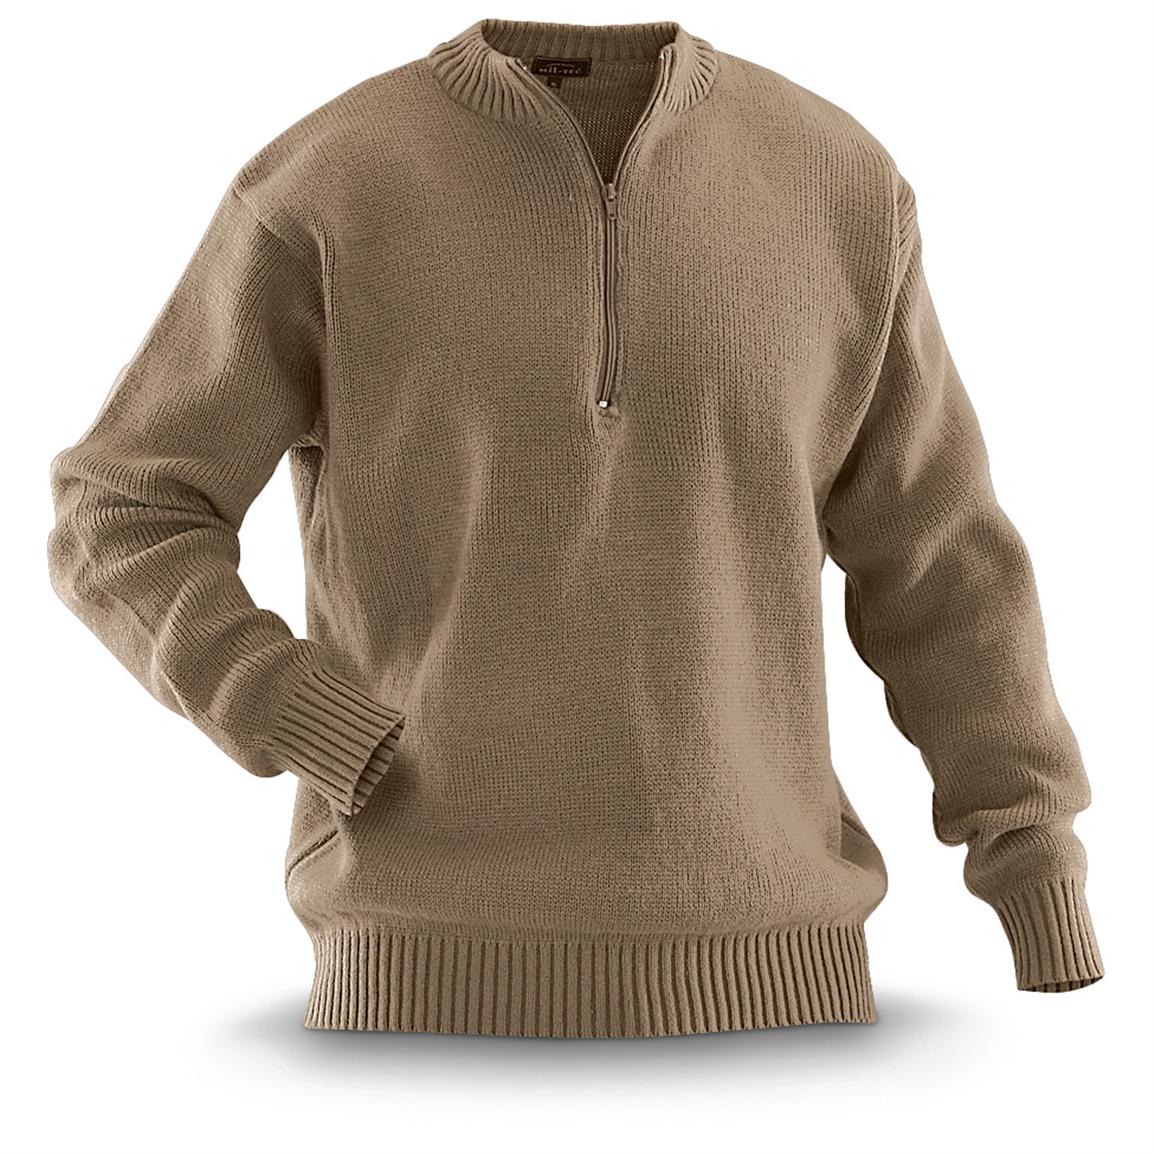 Mil-Tec® 1/4-zip Swiss Military-style Sweater, Coyote - 282362 ...